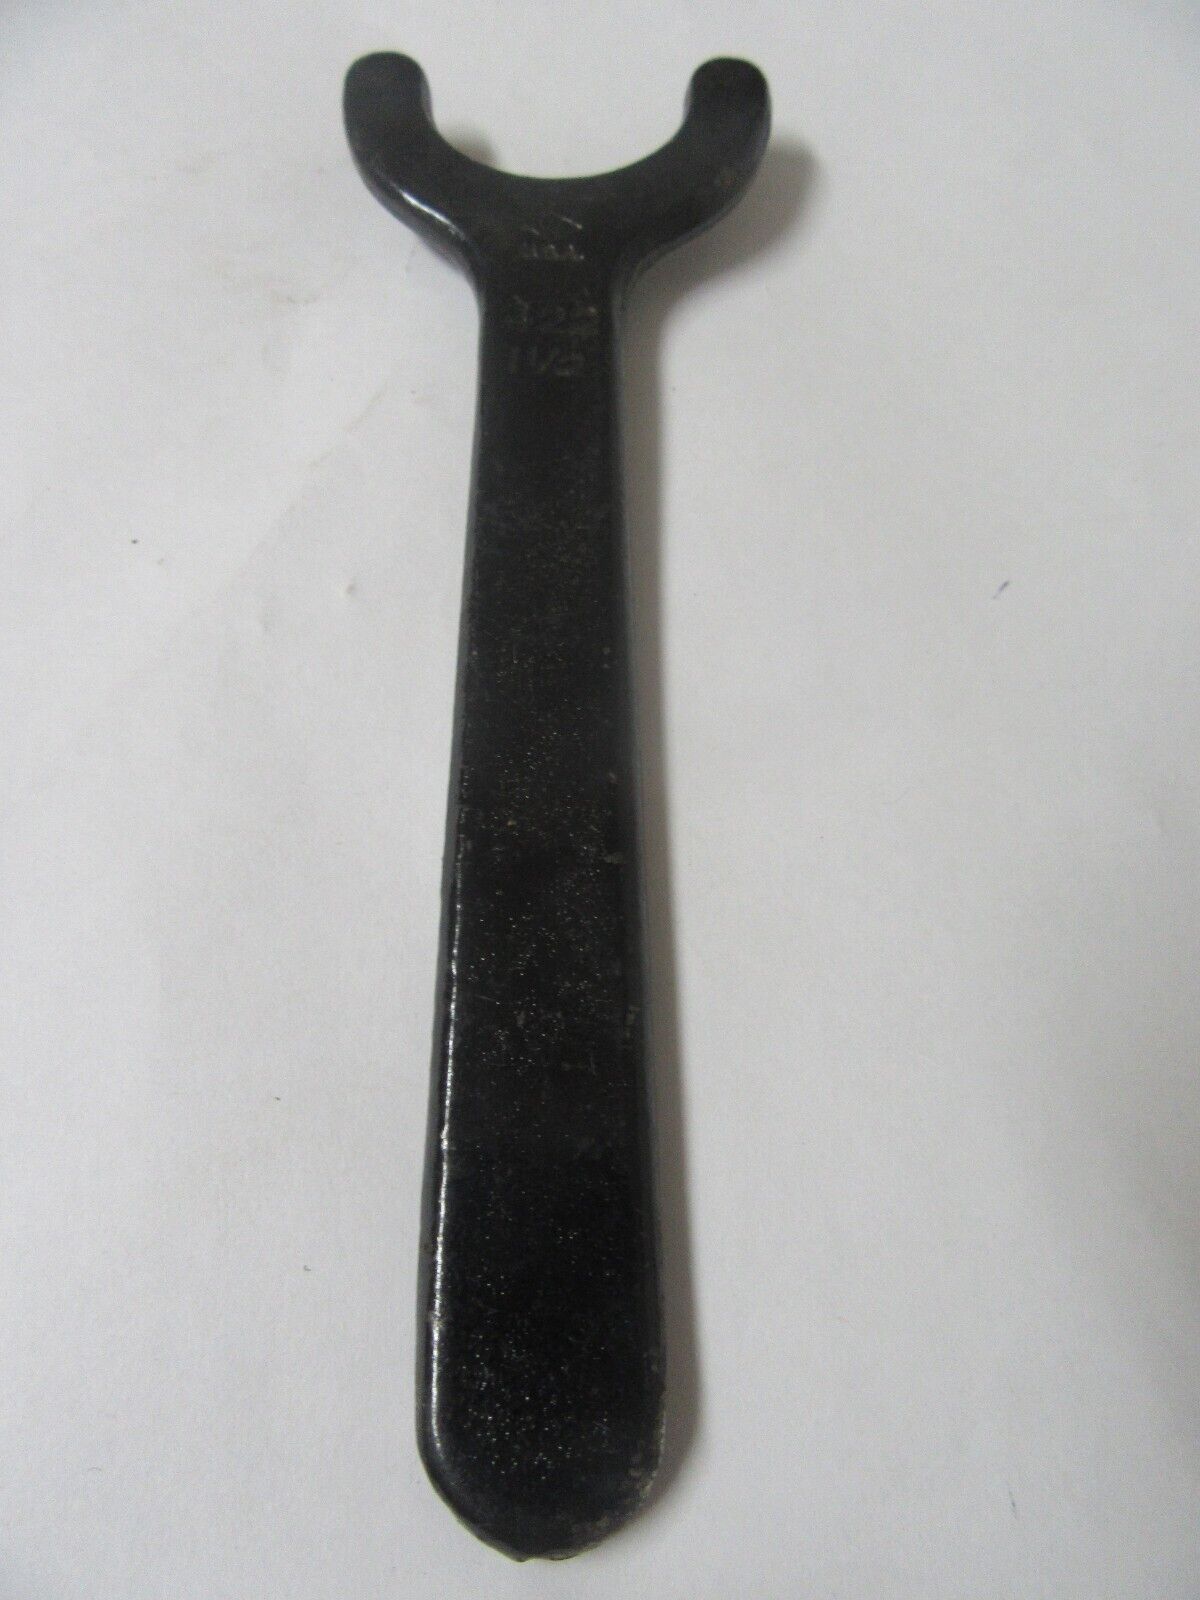 Williams 1-1/2 Inch Spanner Wrench 422 in EXCELLENT Condition